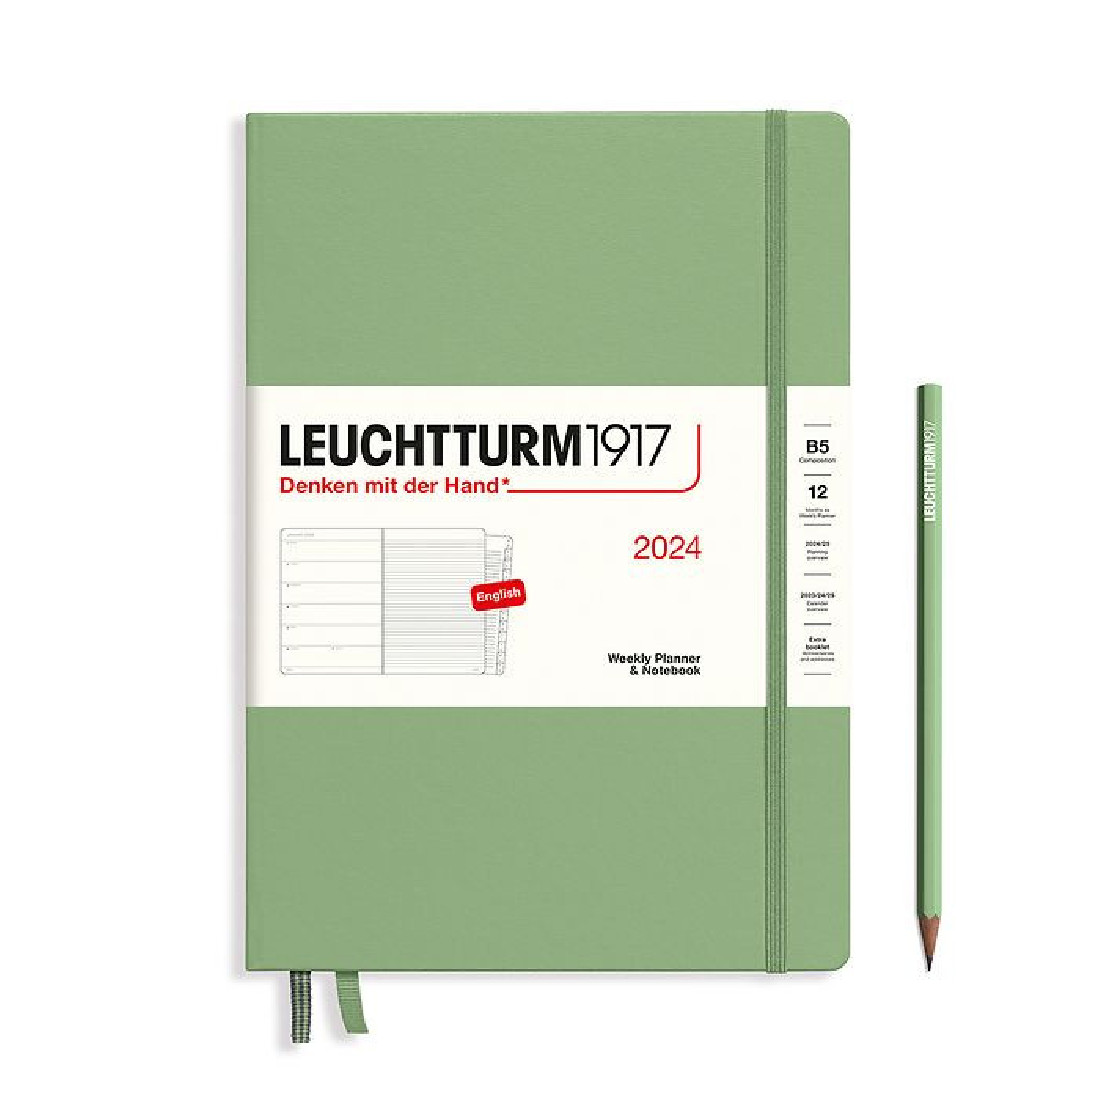 Leuchtturm 1917 Weekly Planner and Notebook 2024 Sage B5 Hard Cover